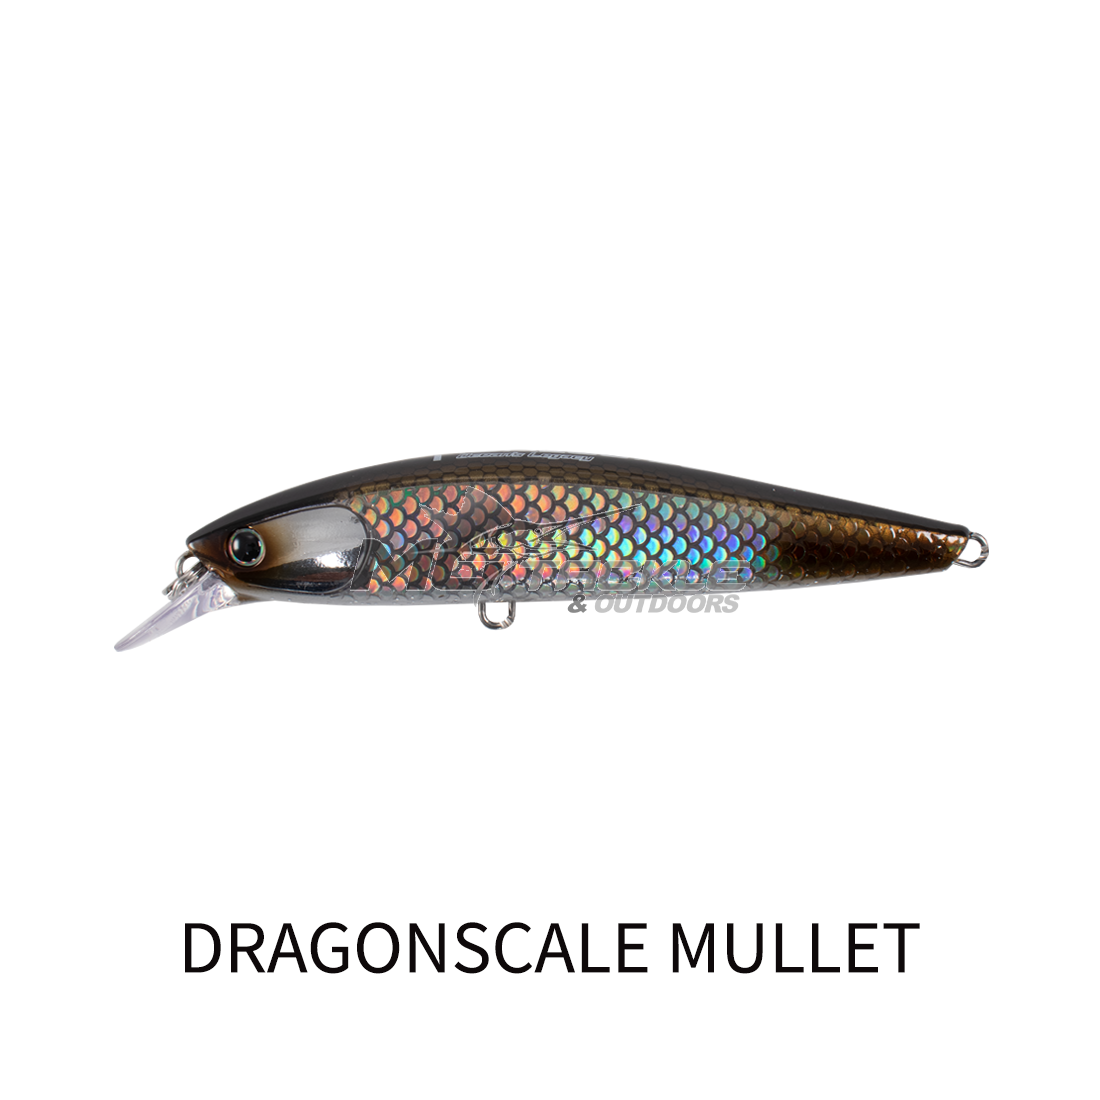 Oceans Legacy Tidalus Minnow Lure